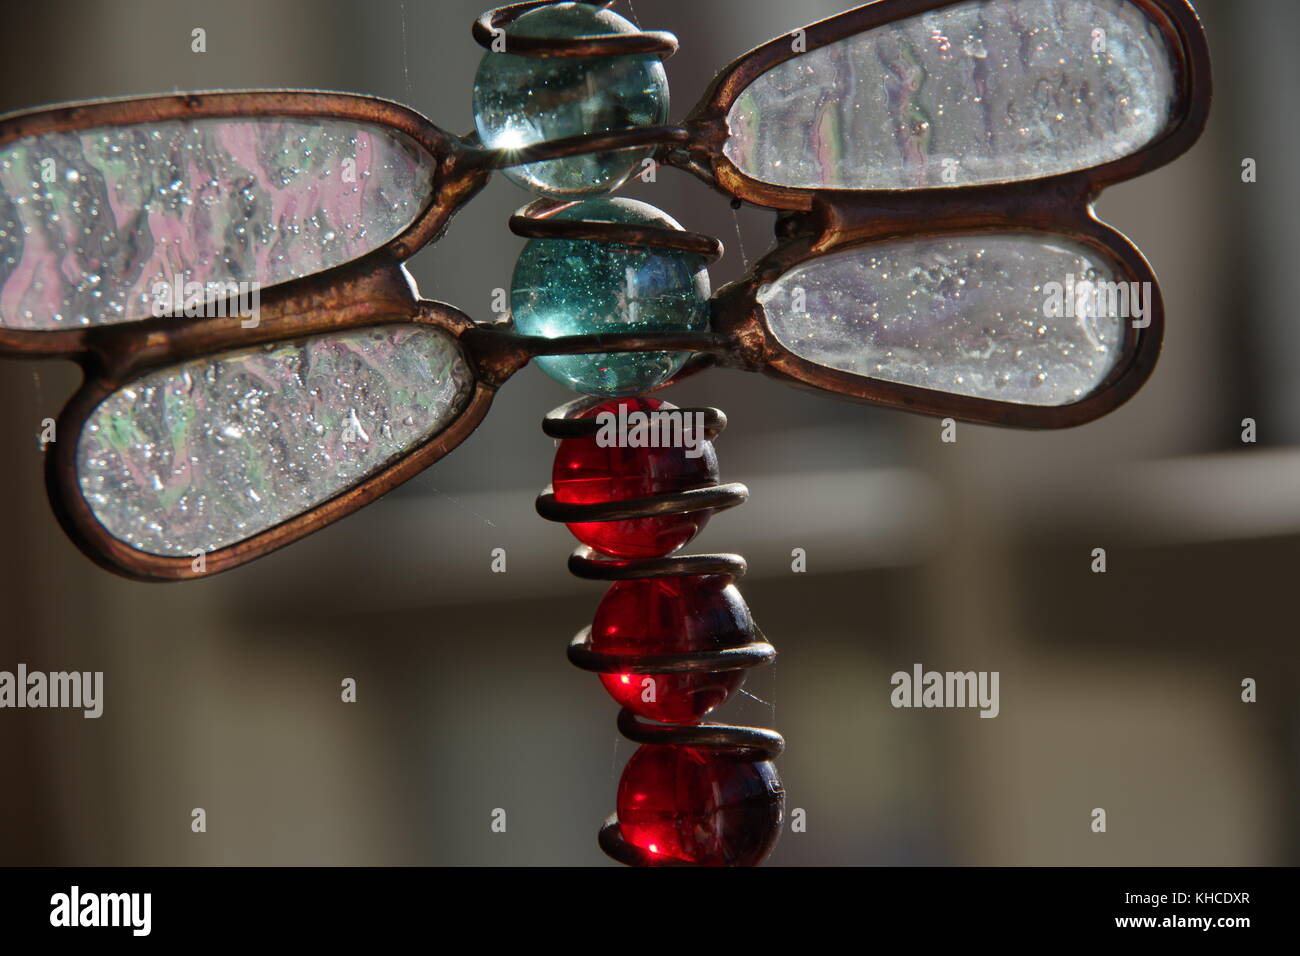 Close-ups of unique suspended glass and wire art. Stock Photo